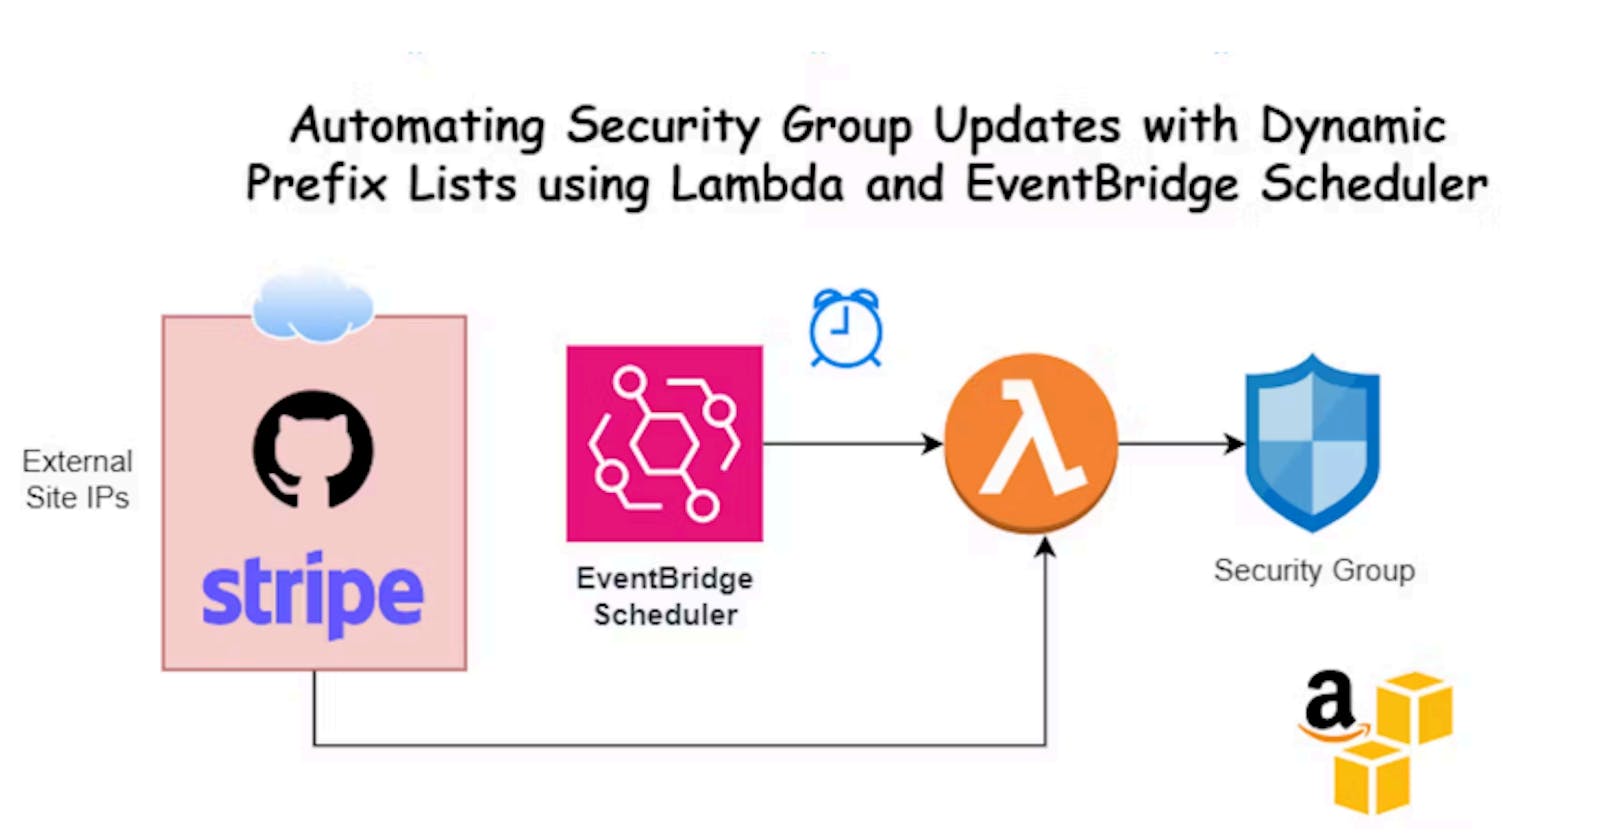 Automating Security Group Updates with
Dynamic Prefix Lists using Lambda and
EventBridge Scheduler